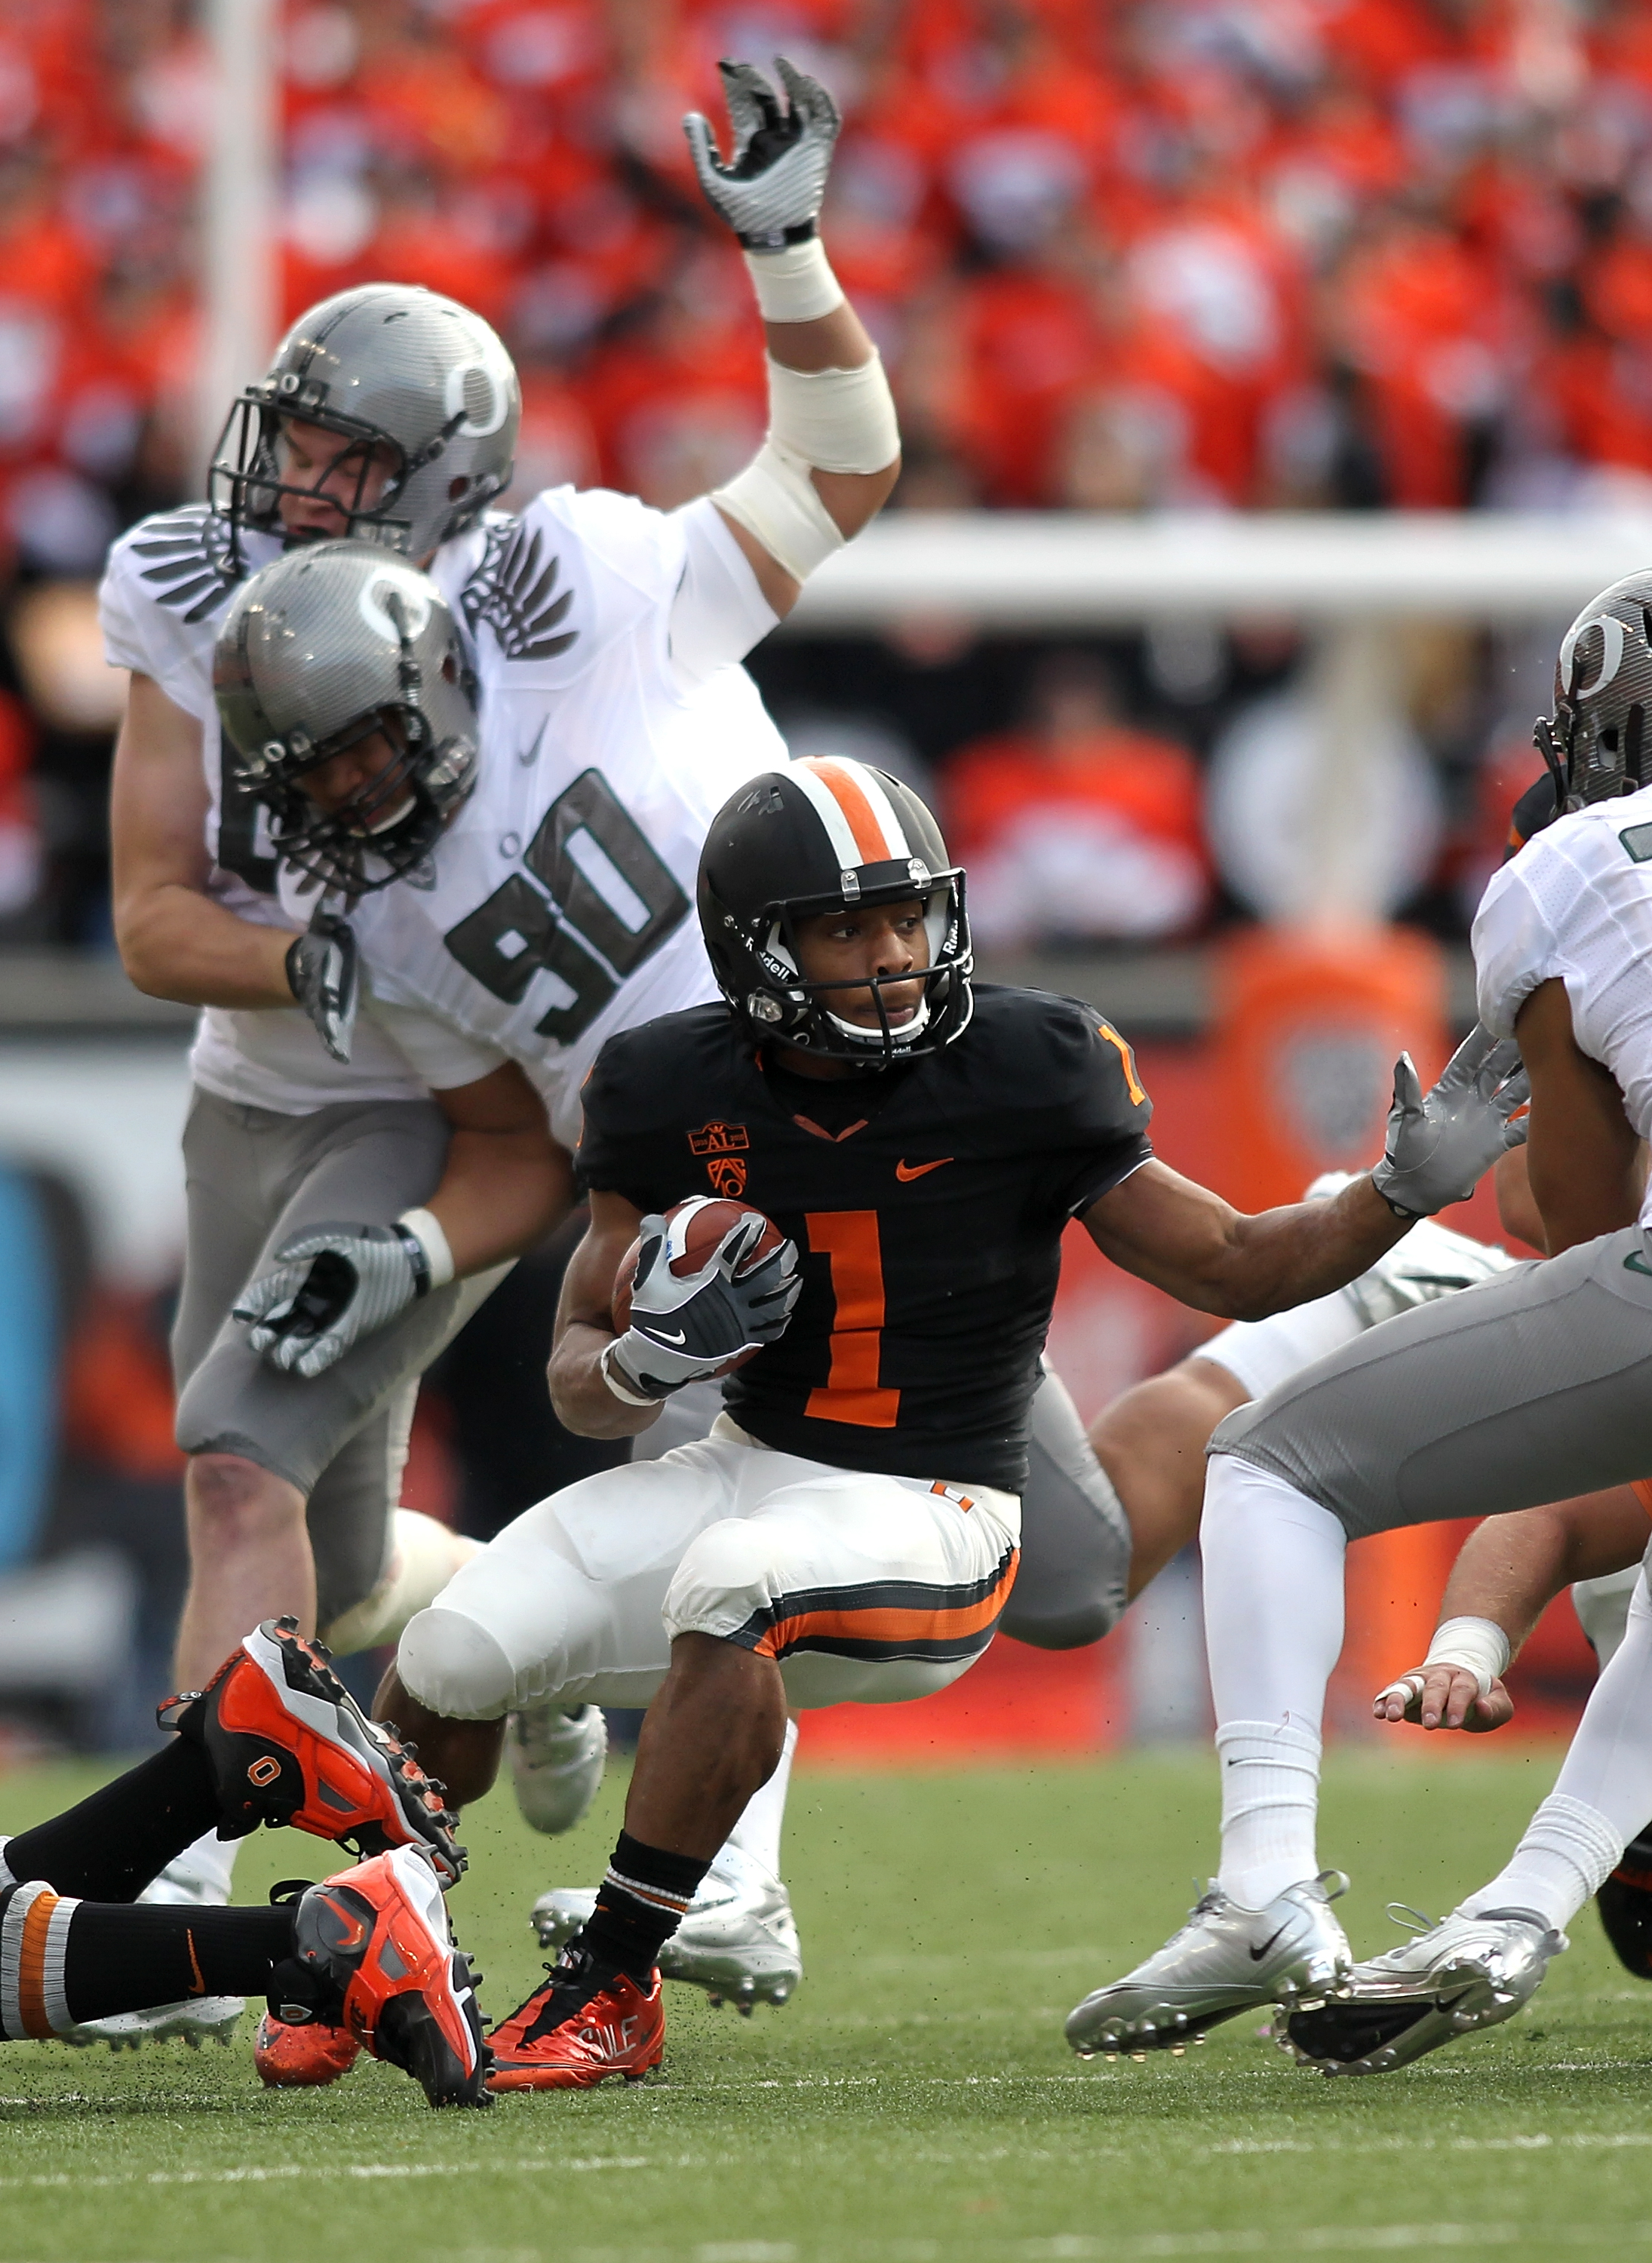 CORVALLIS, OR - DECEMBER 04:  Jacquizz Rodgers #1 of the Oregon State Beavers runs the ball against the Oregon Ducks during the 114th Civil War on December 4, 2010 at the Reser Stadium in Corvallis, Oregon.  (Photo by Jonathan Ferrey/Getty Images)